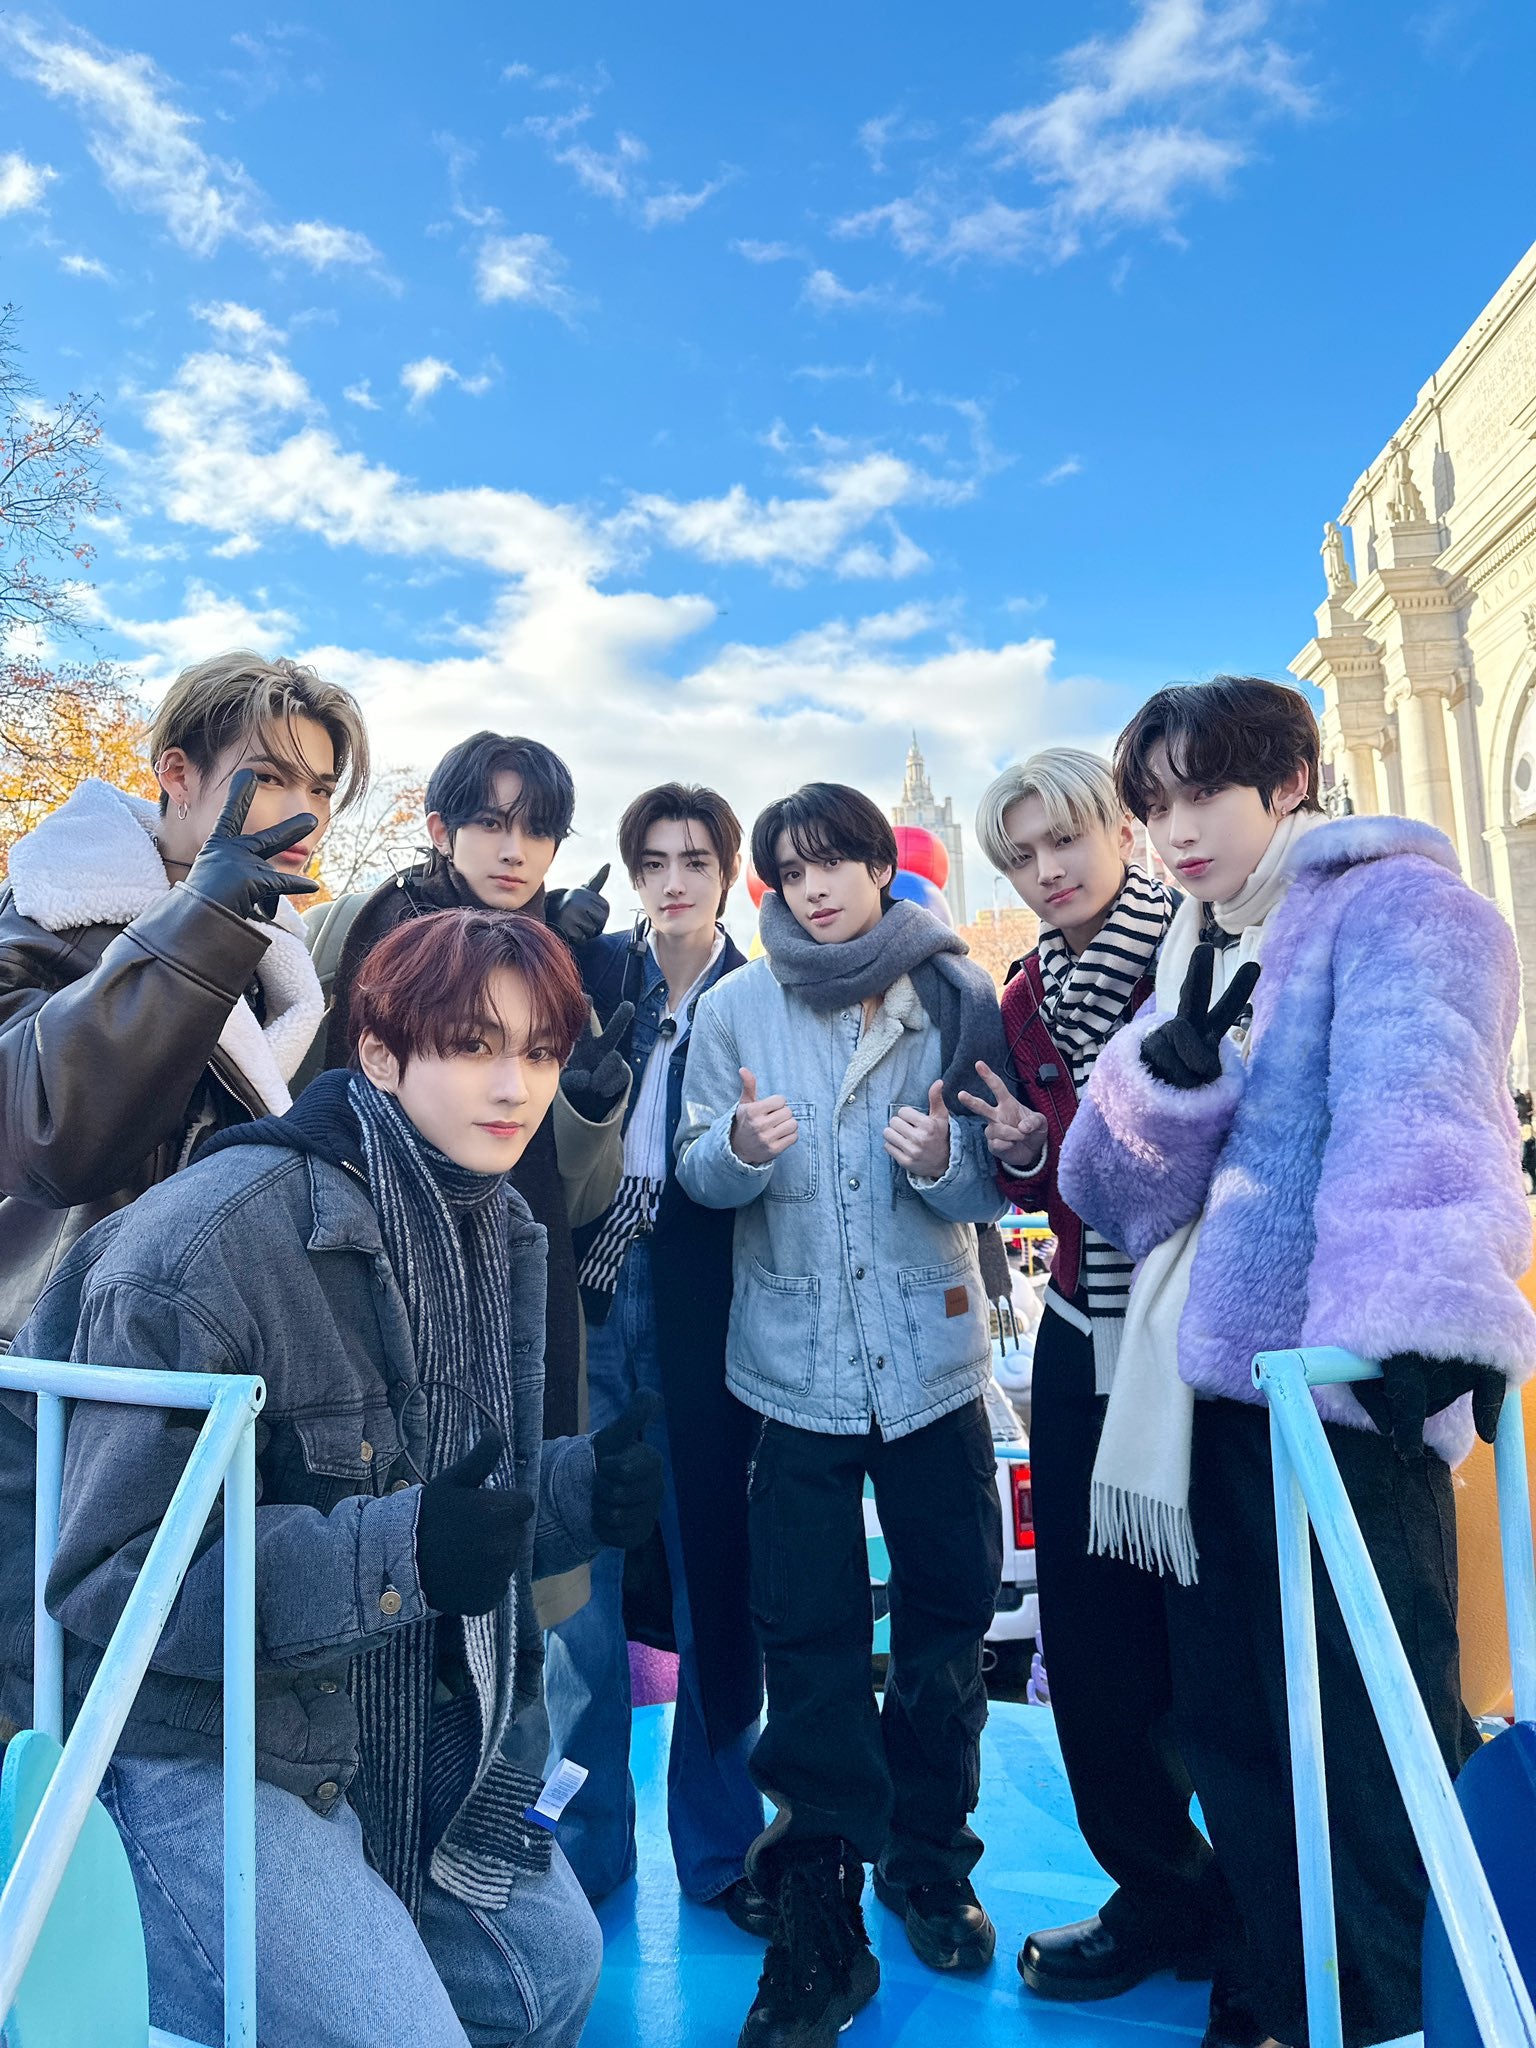 [Kpop Planet News] ENHYPEN Makes Big Waves at Macy’s Thanksgiving Parade With “Keep Swimmin’ Through”